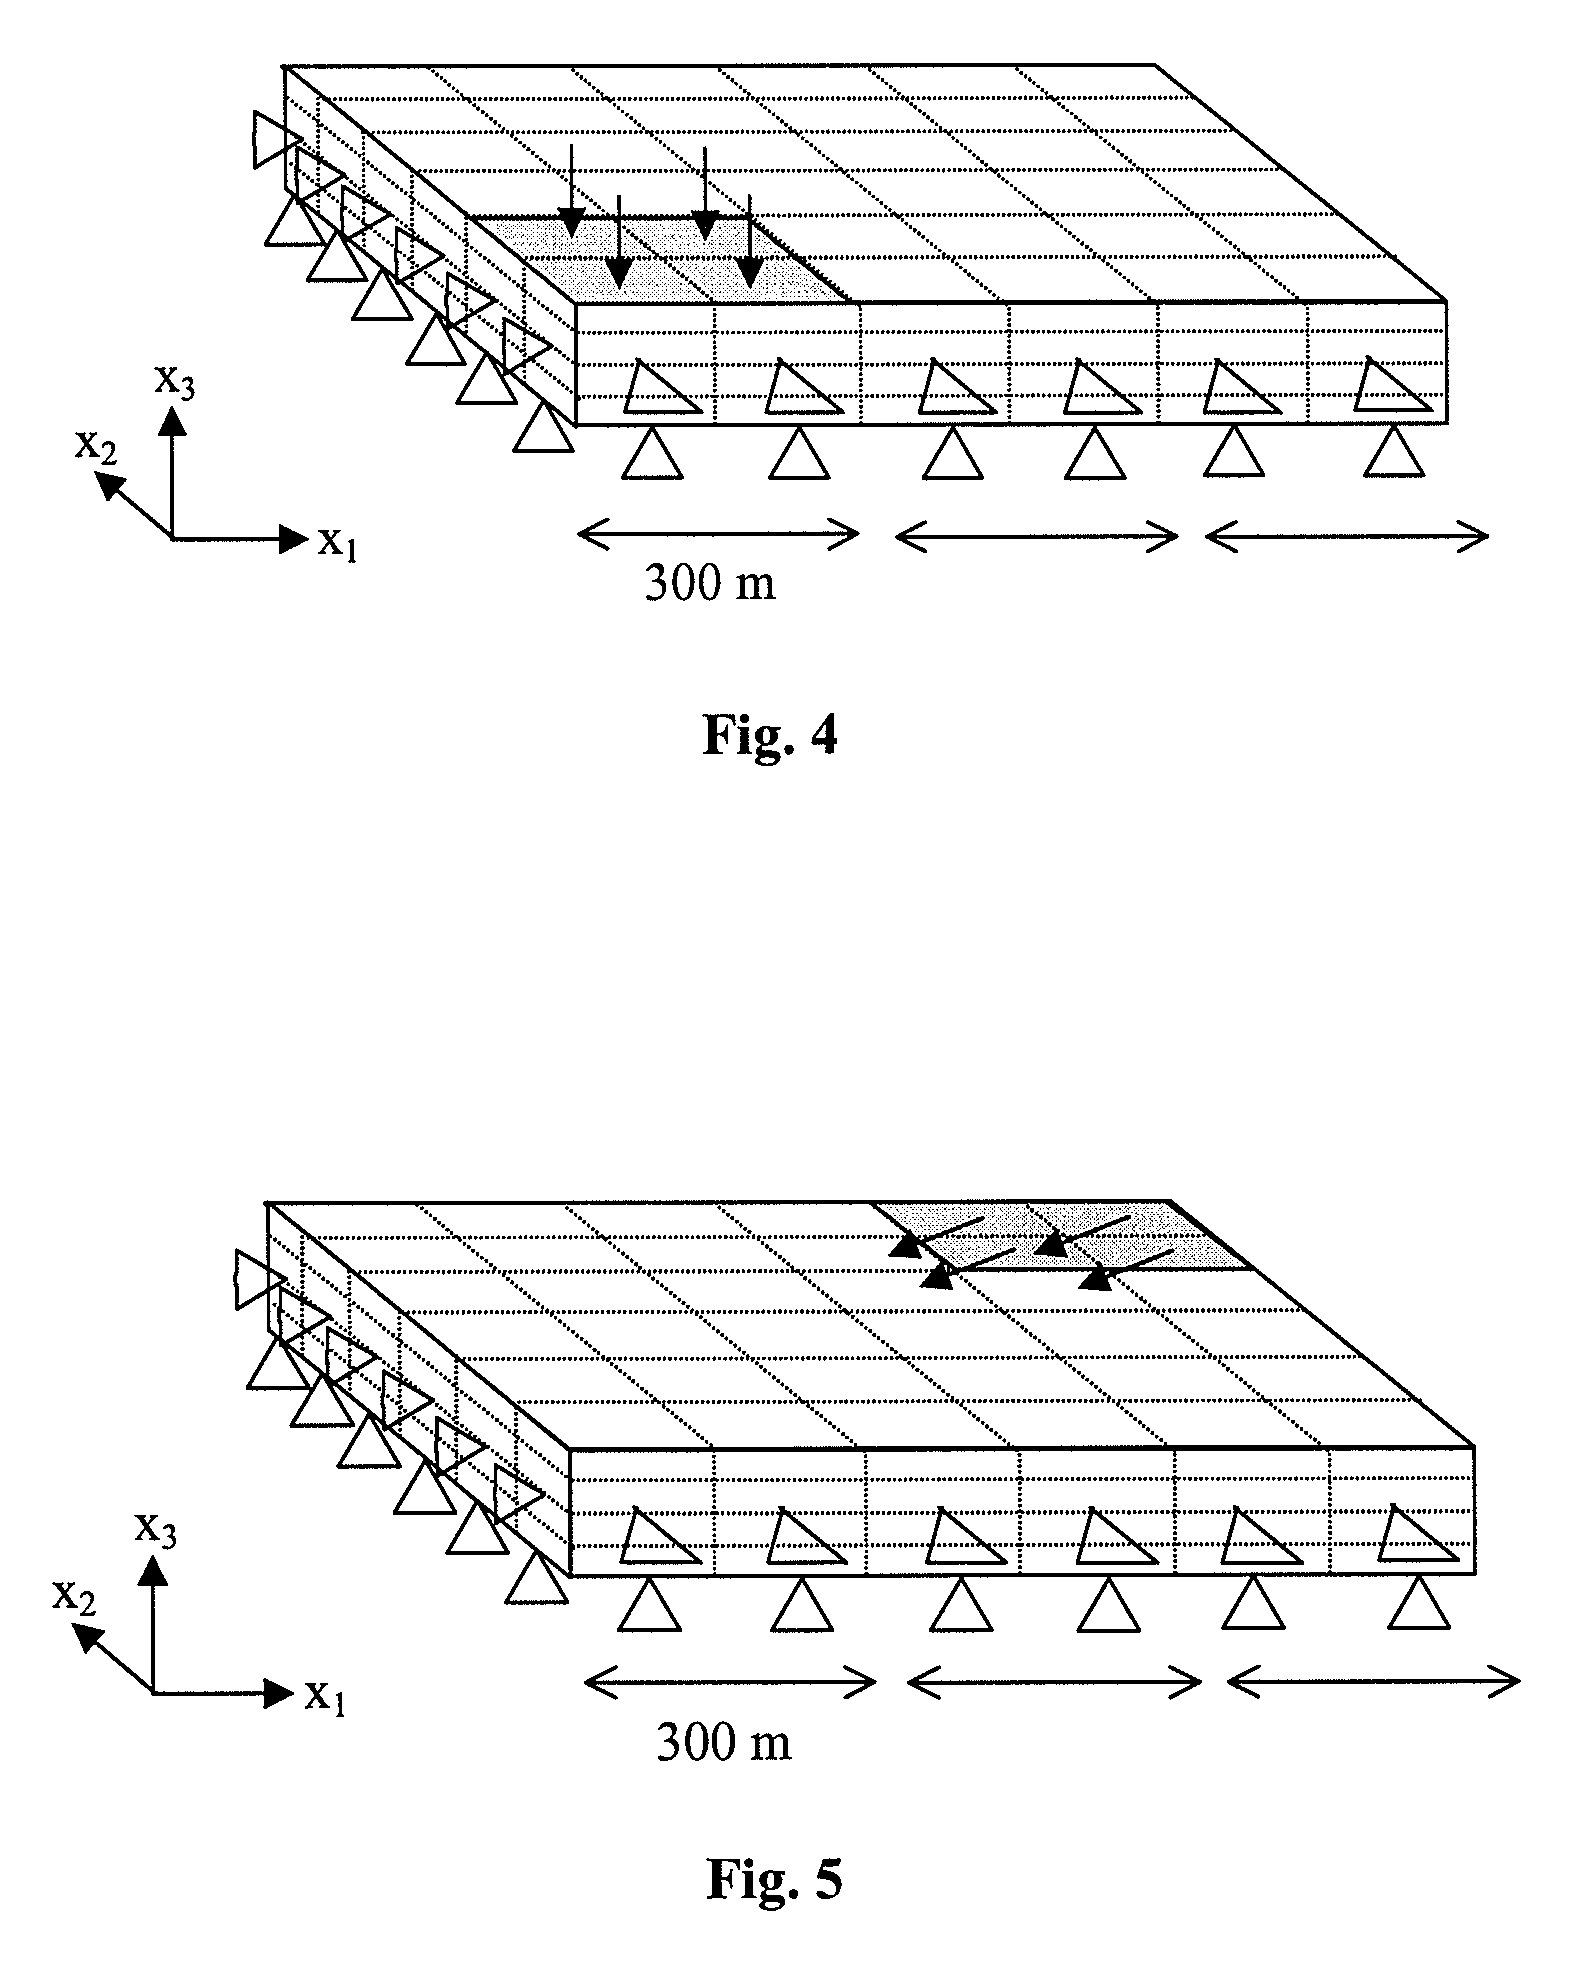 Method of constructing a geomechanical model of an underground zone intended to be coupled with a reservoir model